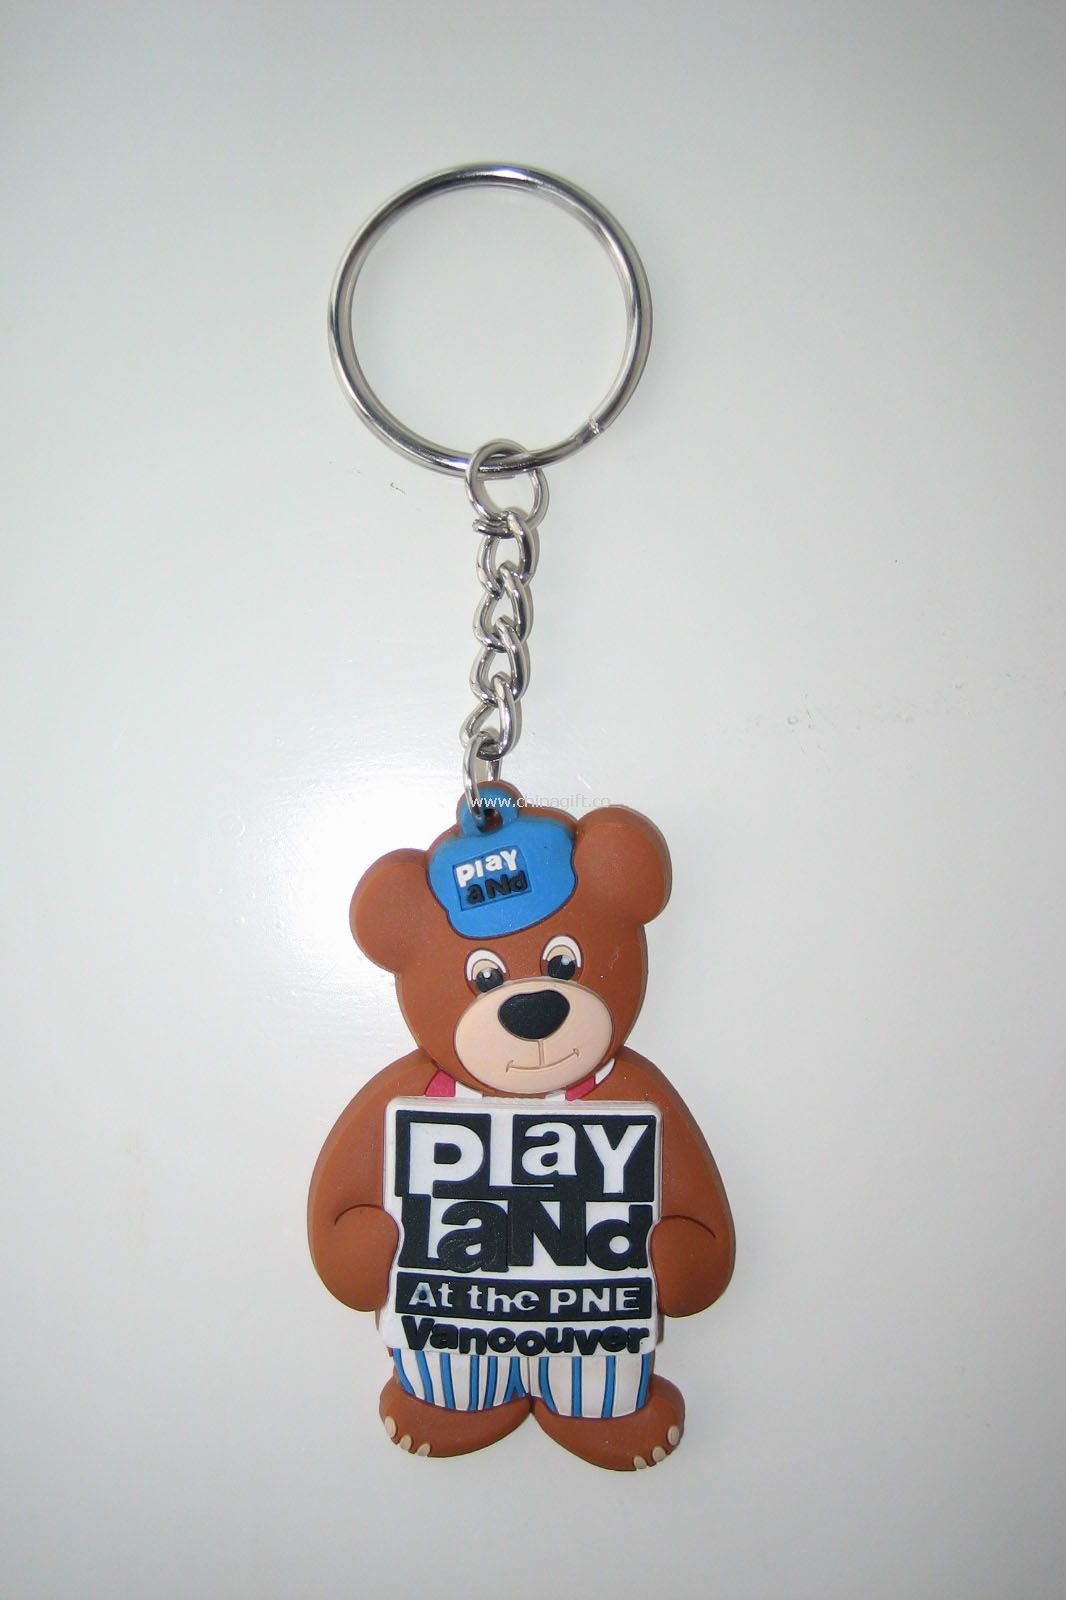 3D key chain made of PVC